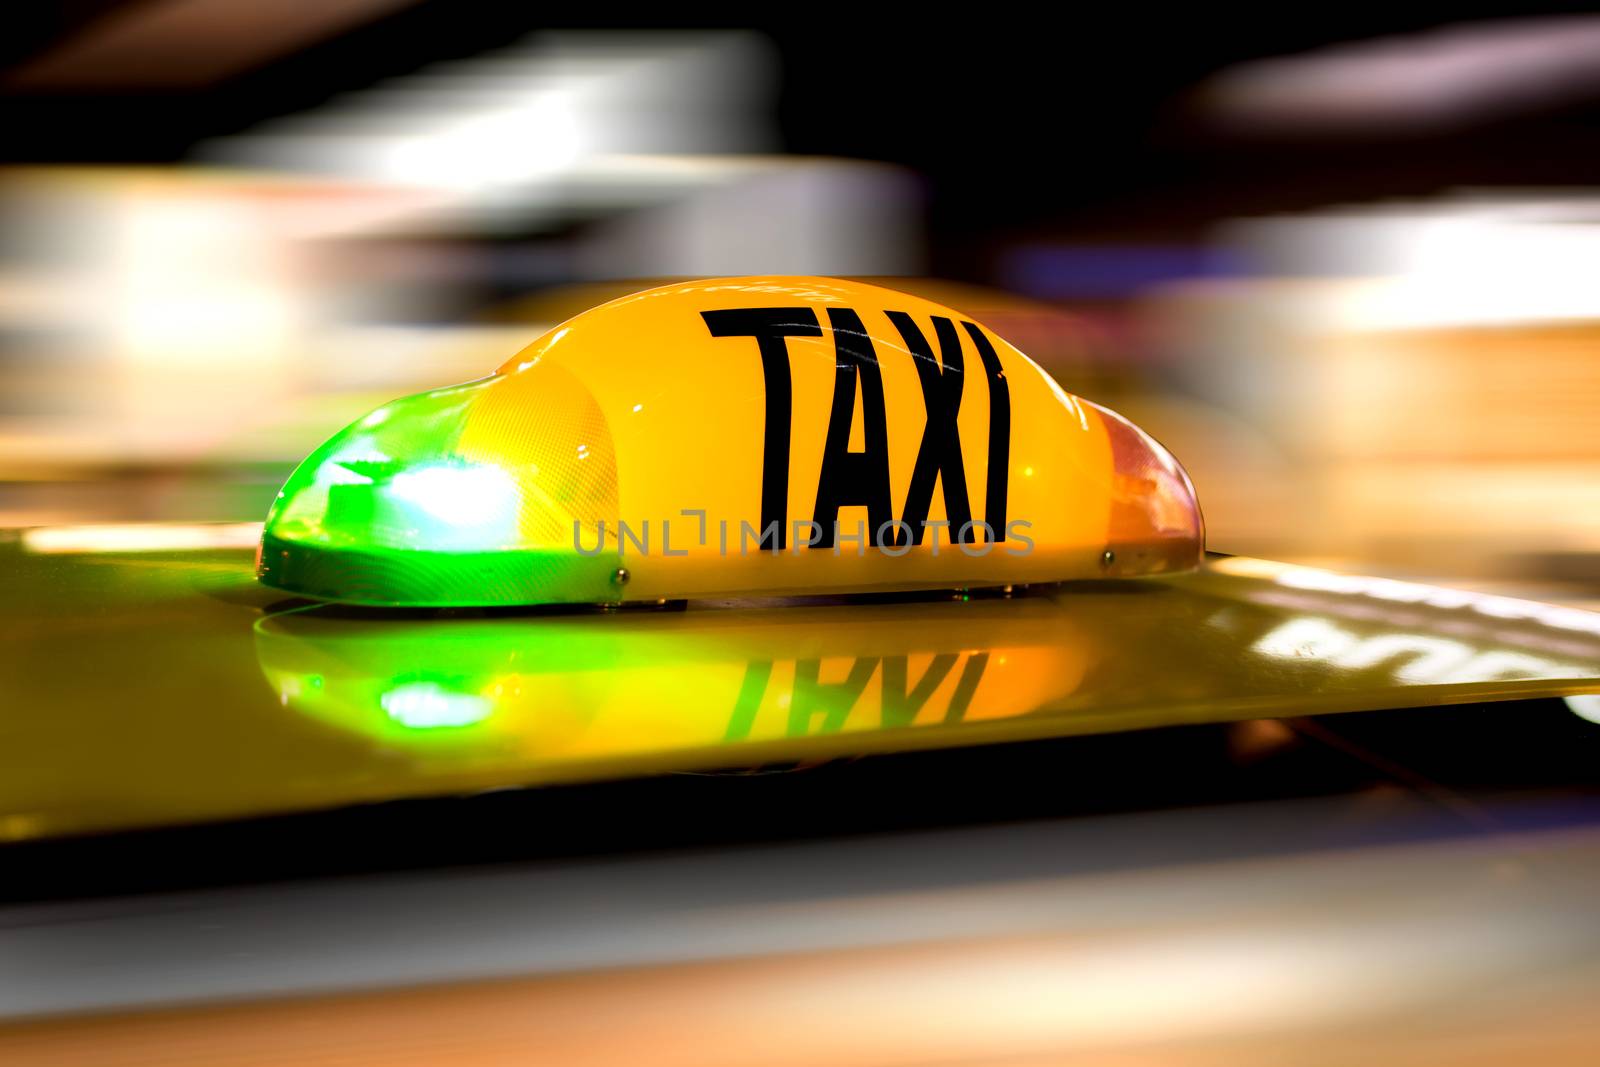 Taxi in motion with speed like blured background.